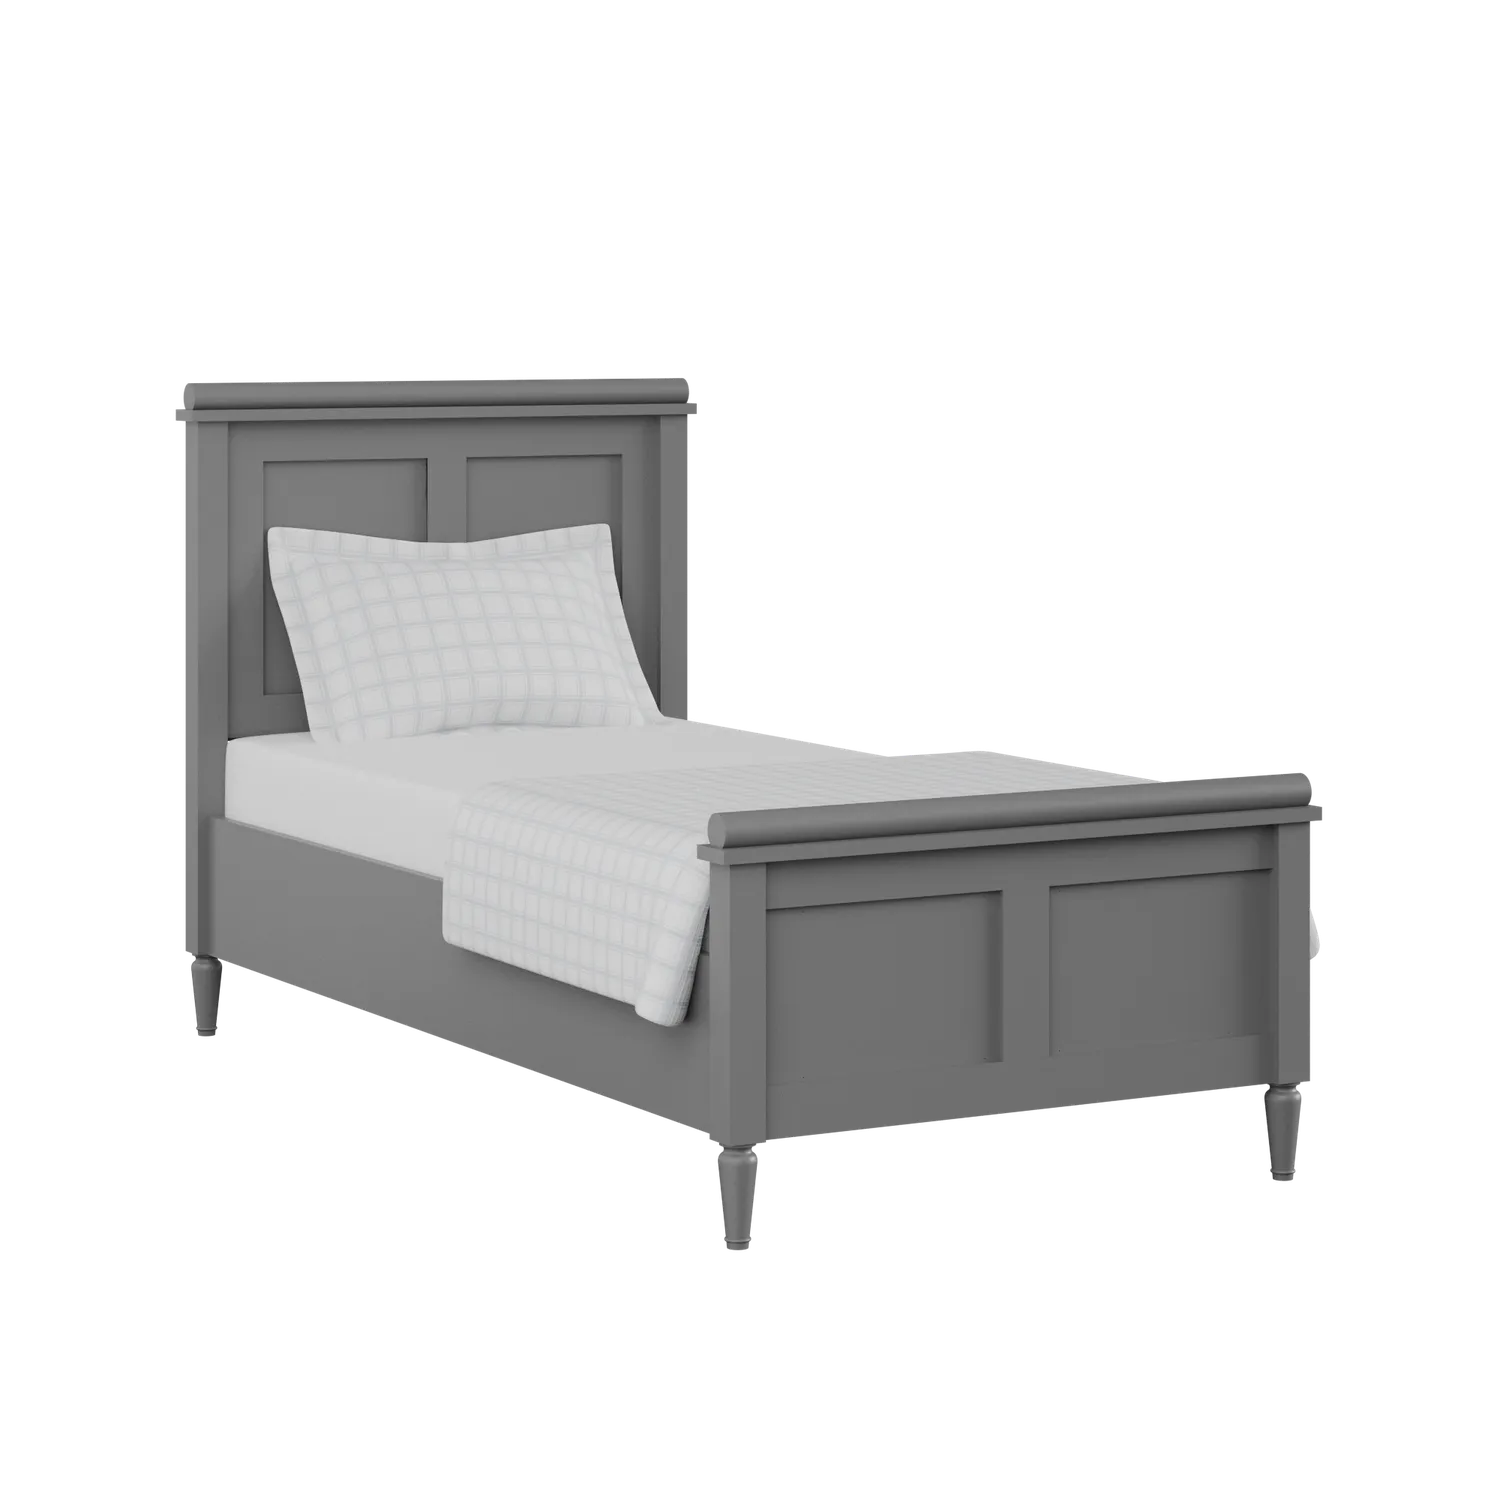 Nocturne Painted single painted wood bed in grey with Juno mattress